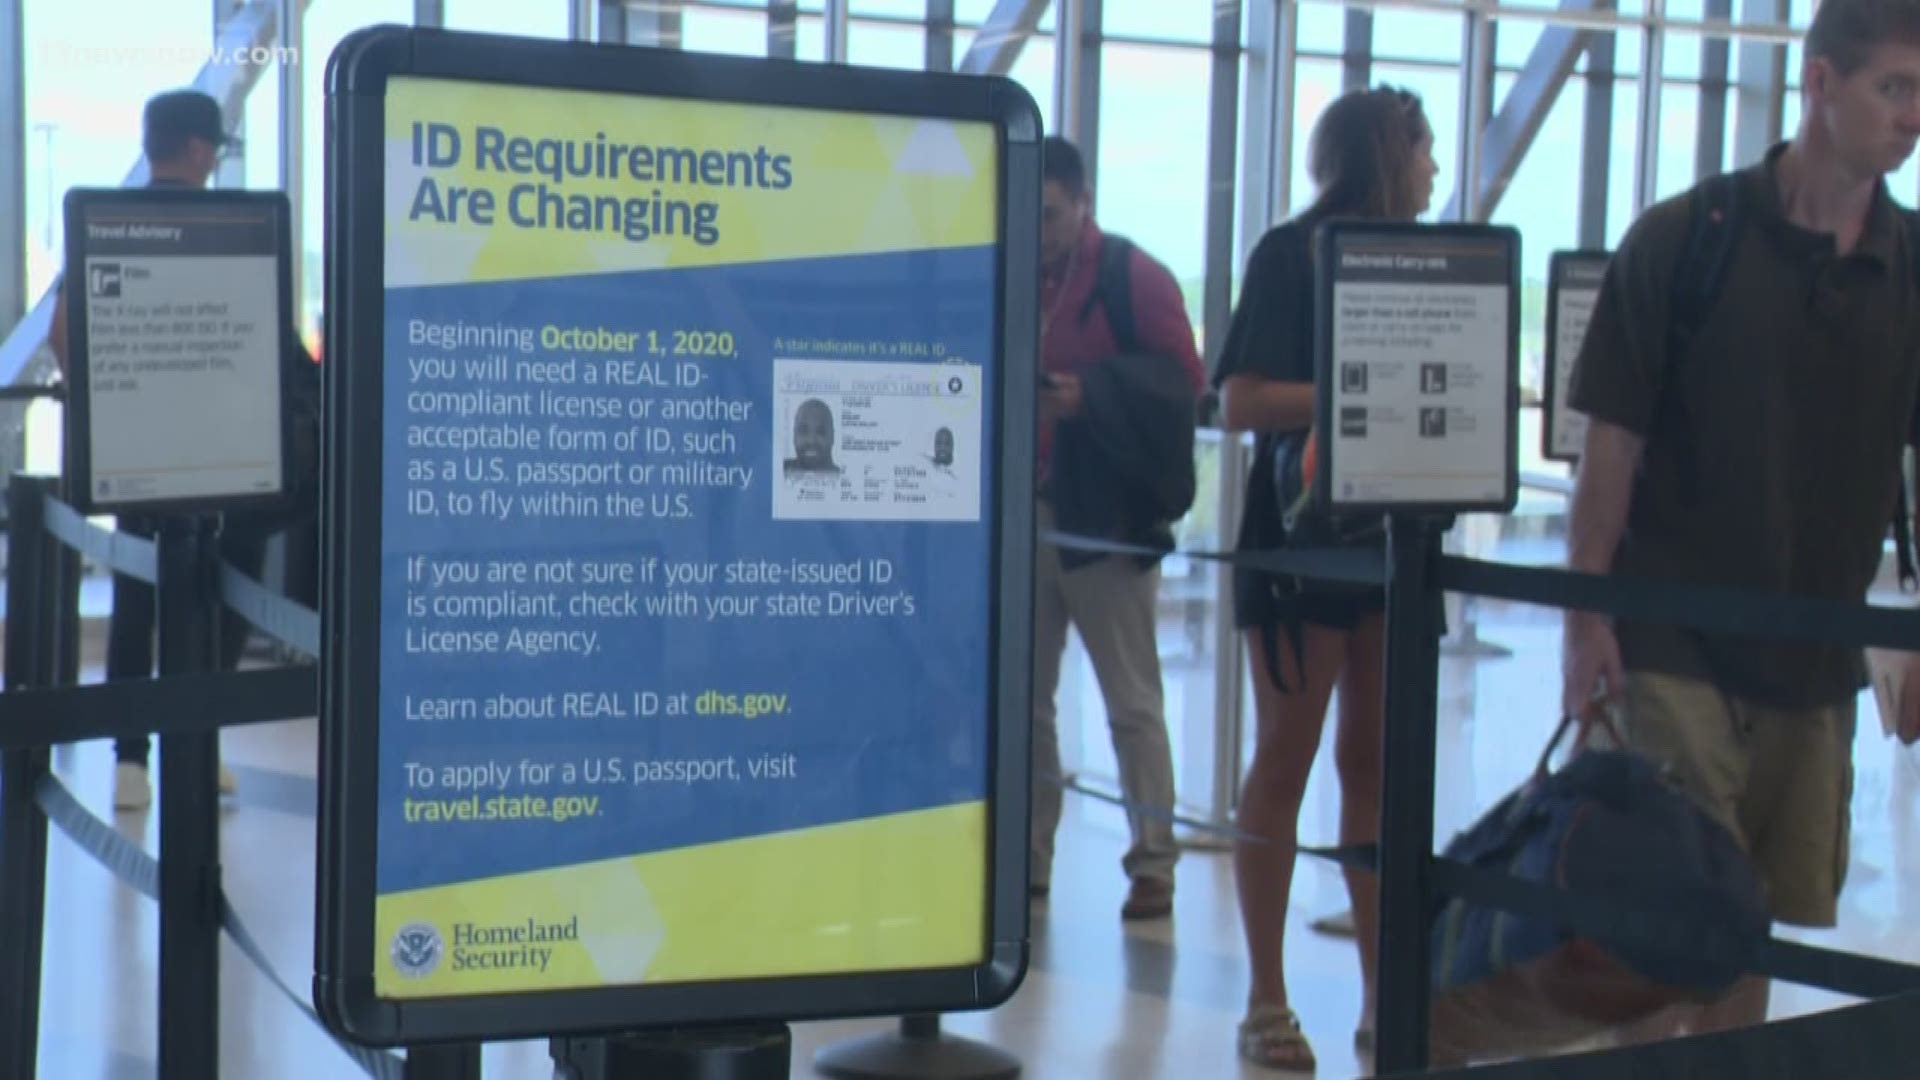 Starting October 2020, if you don't have a Real ID, you're going to need additional identification to fly or enter federal buildings. Minors won't need a Real ID.